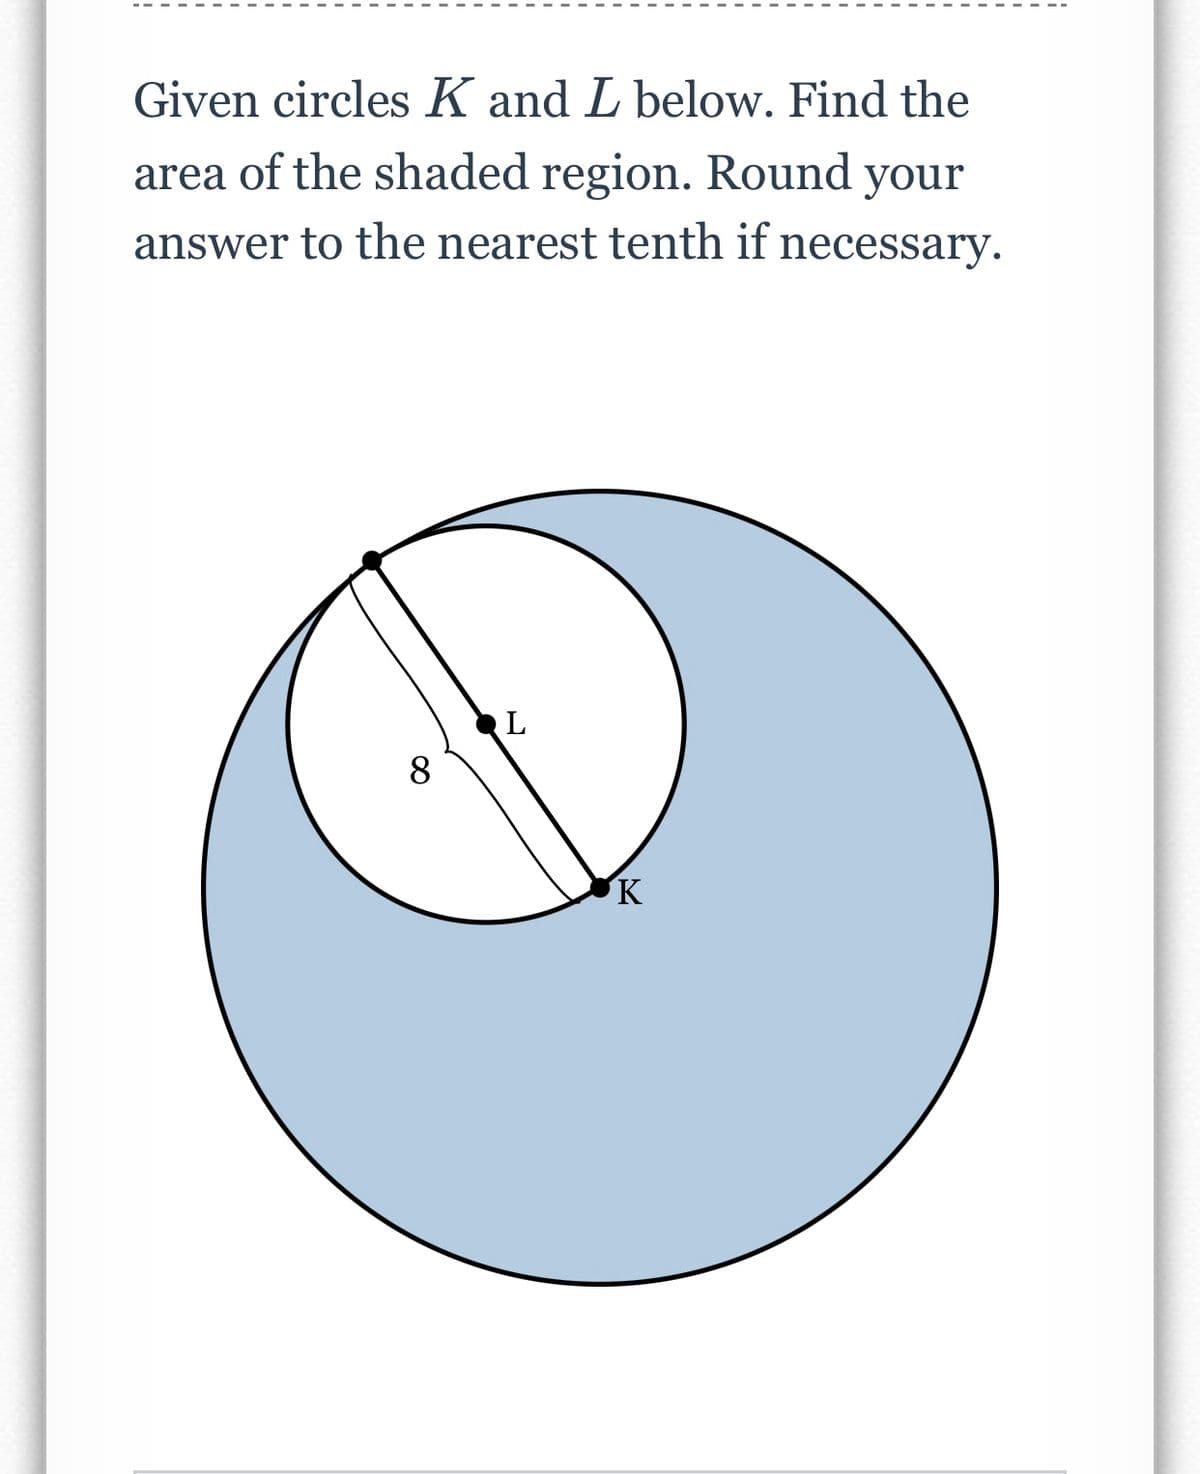 Given circles K and L below. Find the
area of the shaded region. Round your
answer to the nearest tenth if necessary.
8
K